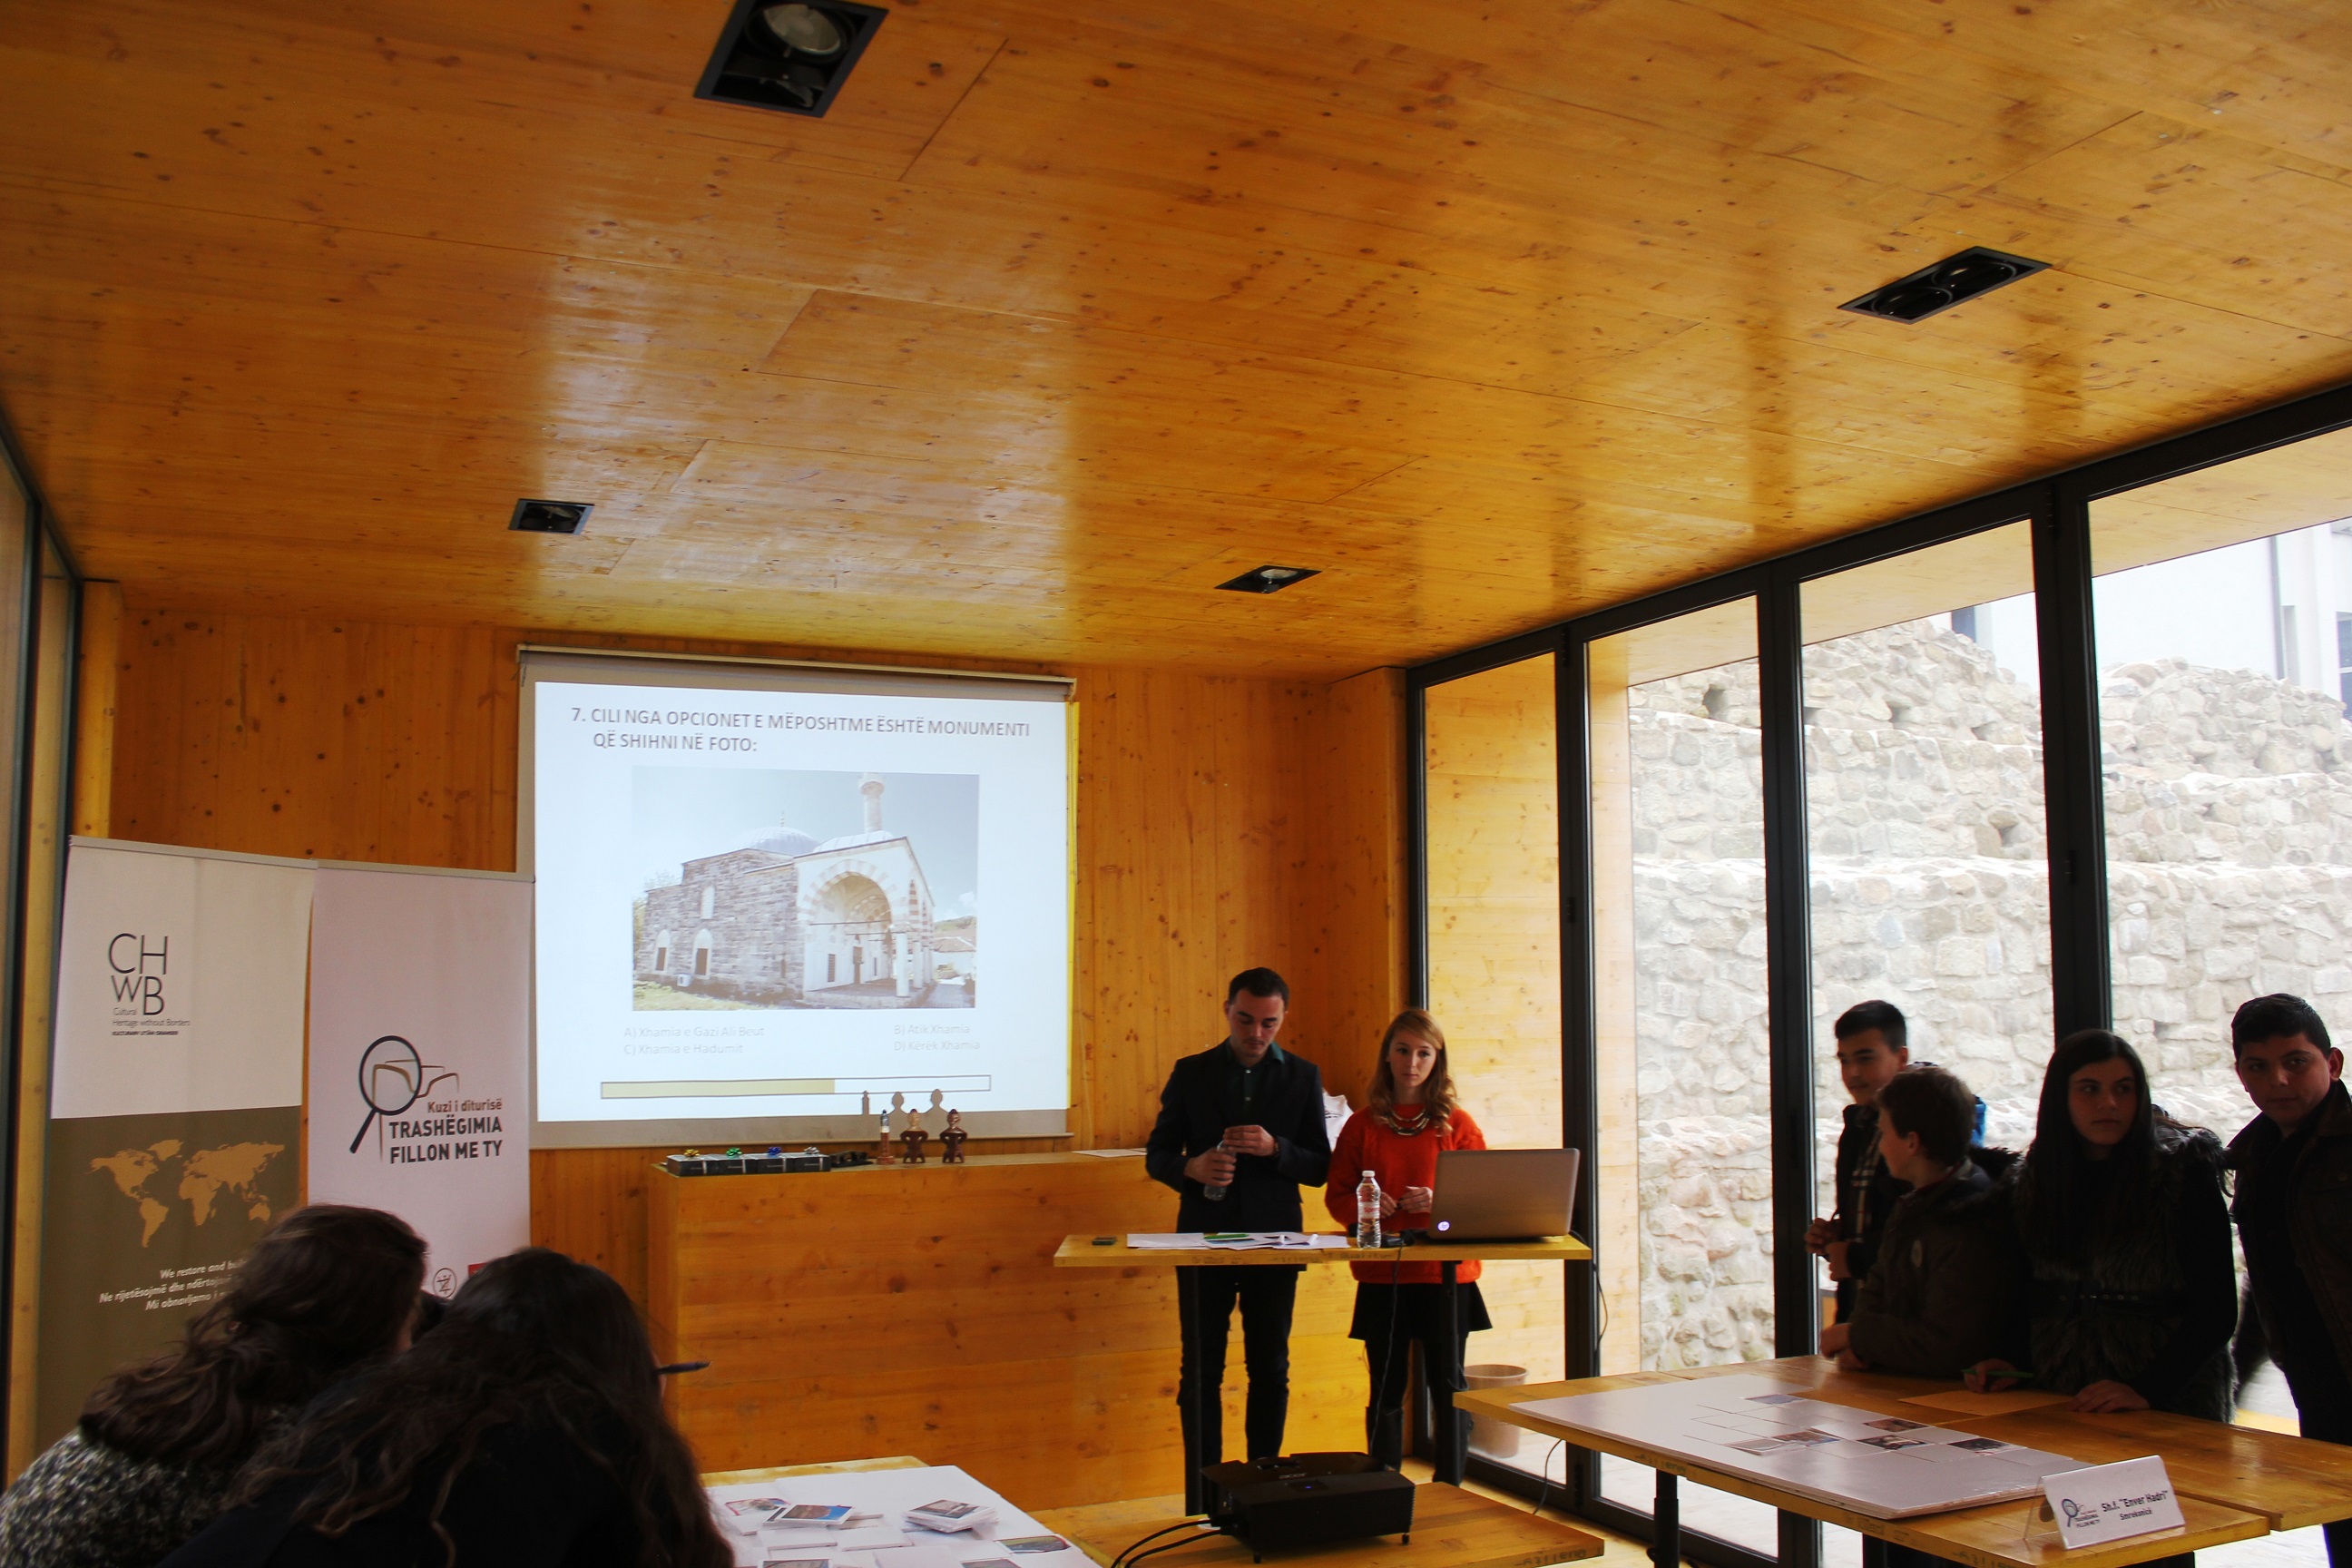 The heritage knowledge quiz held for the first time in Kosovo